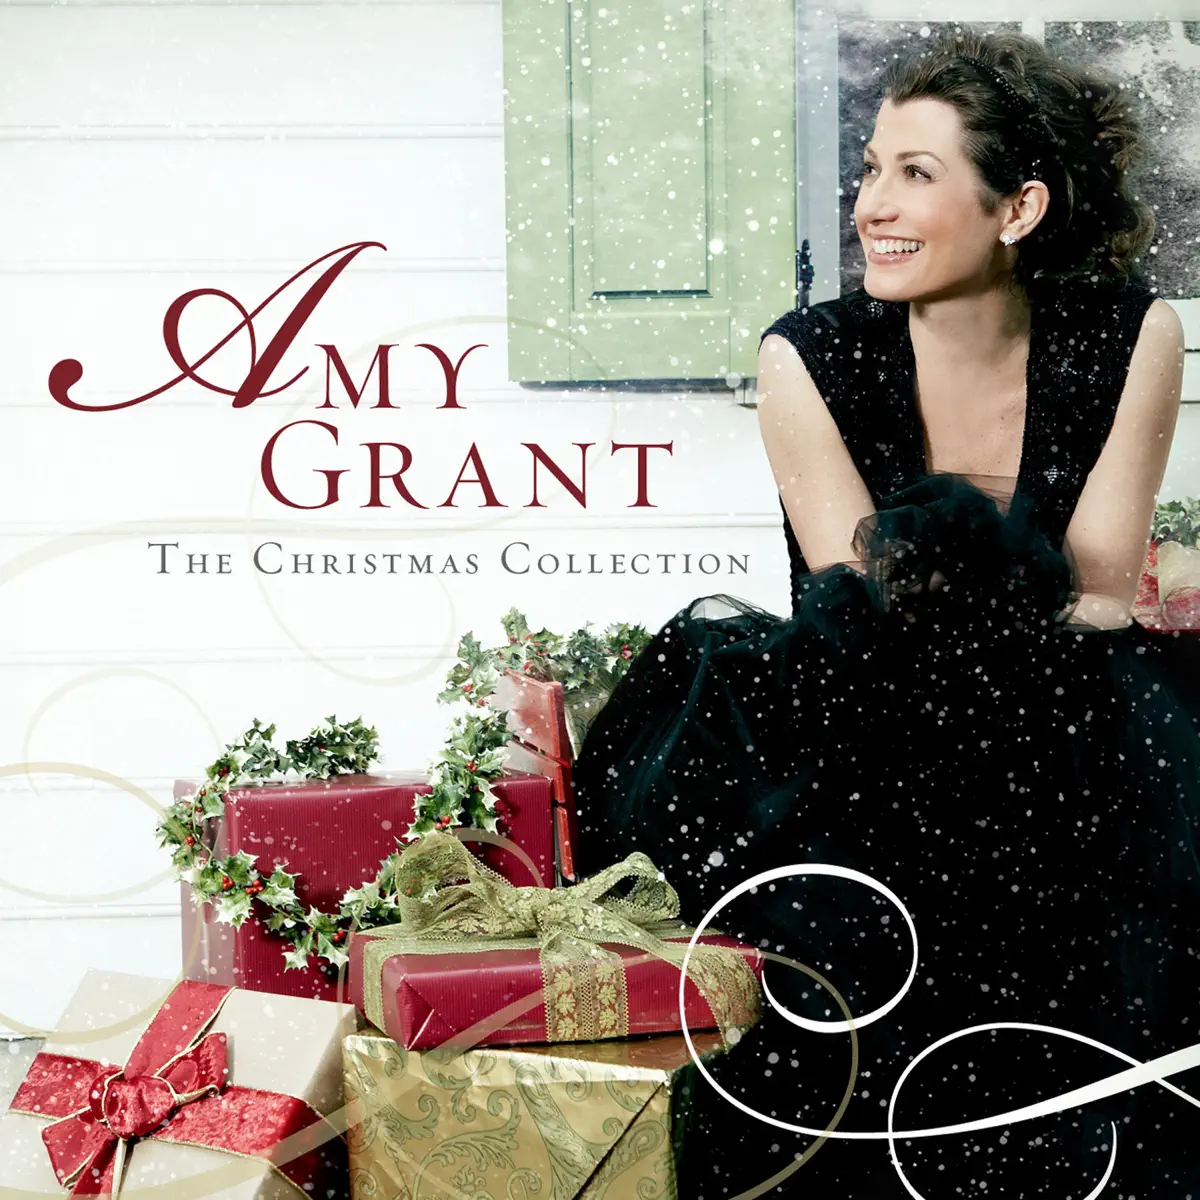 Amy Grant - The Christmas Collection (2008) [iTunes Plus AAC M4A]-新房子